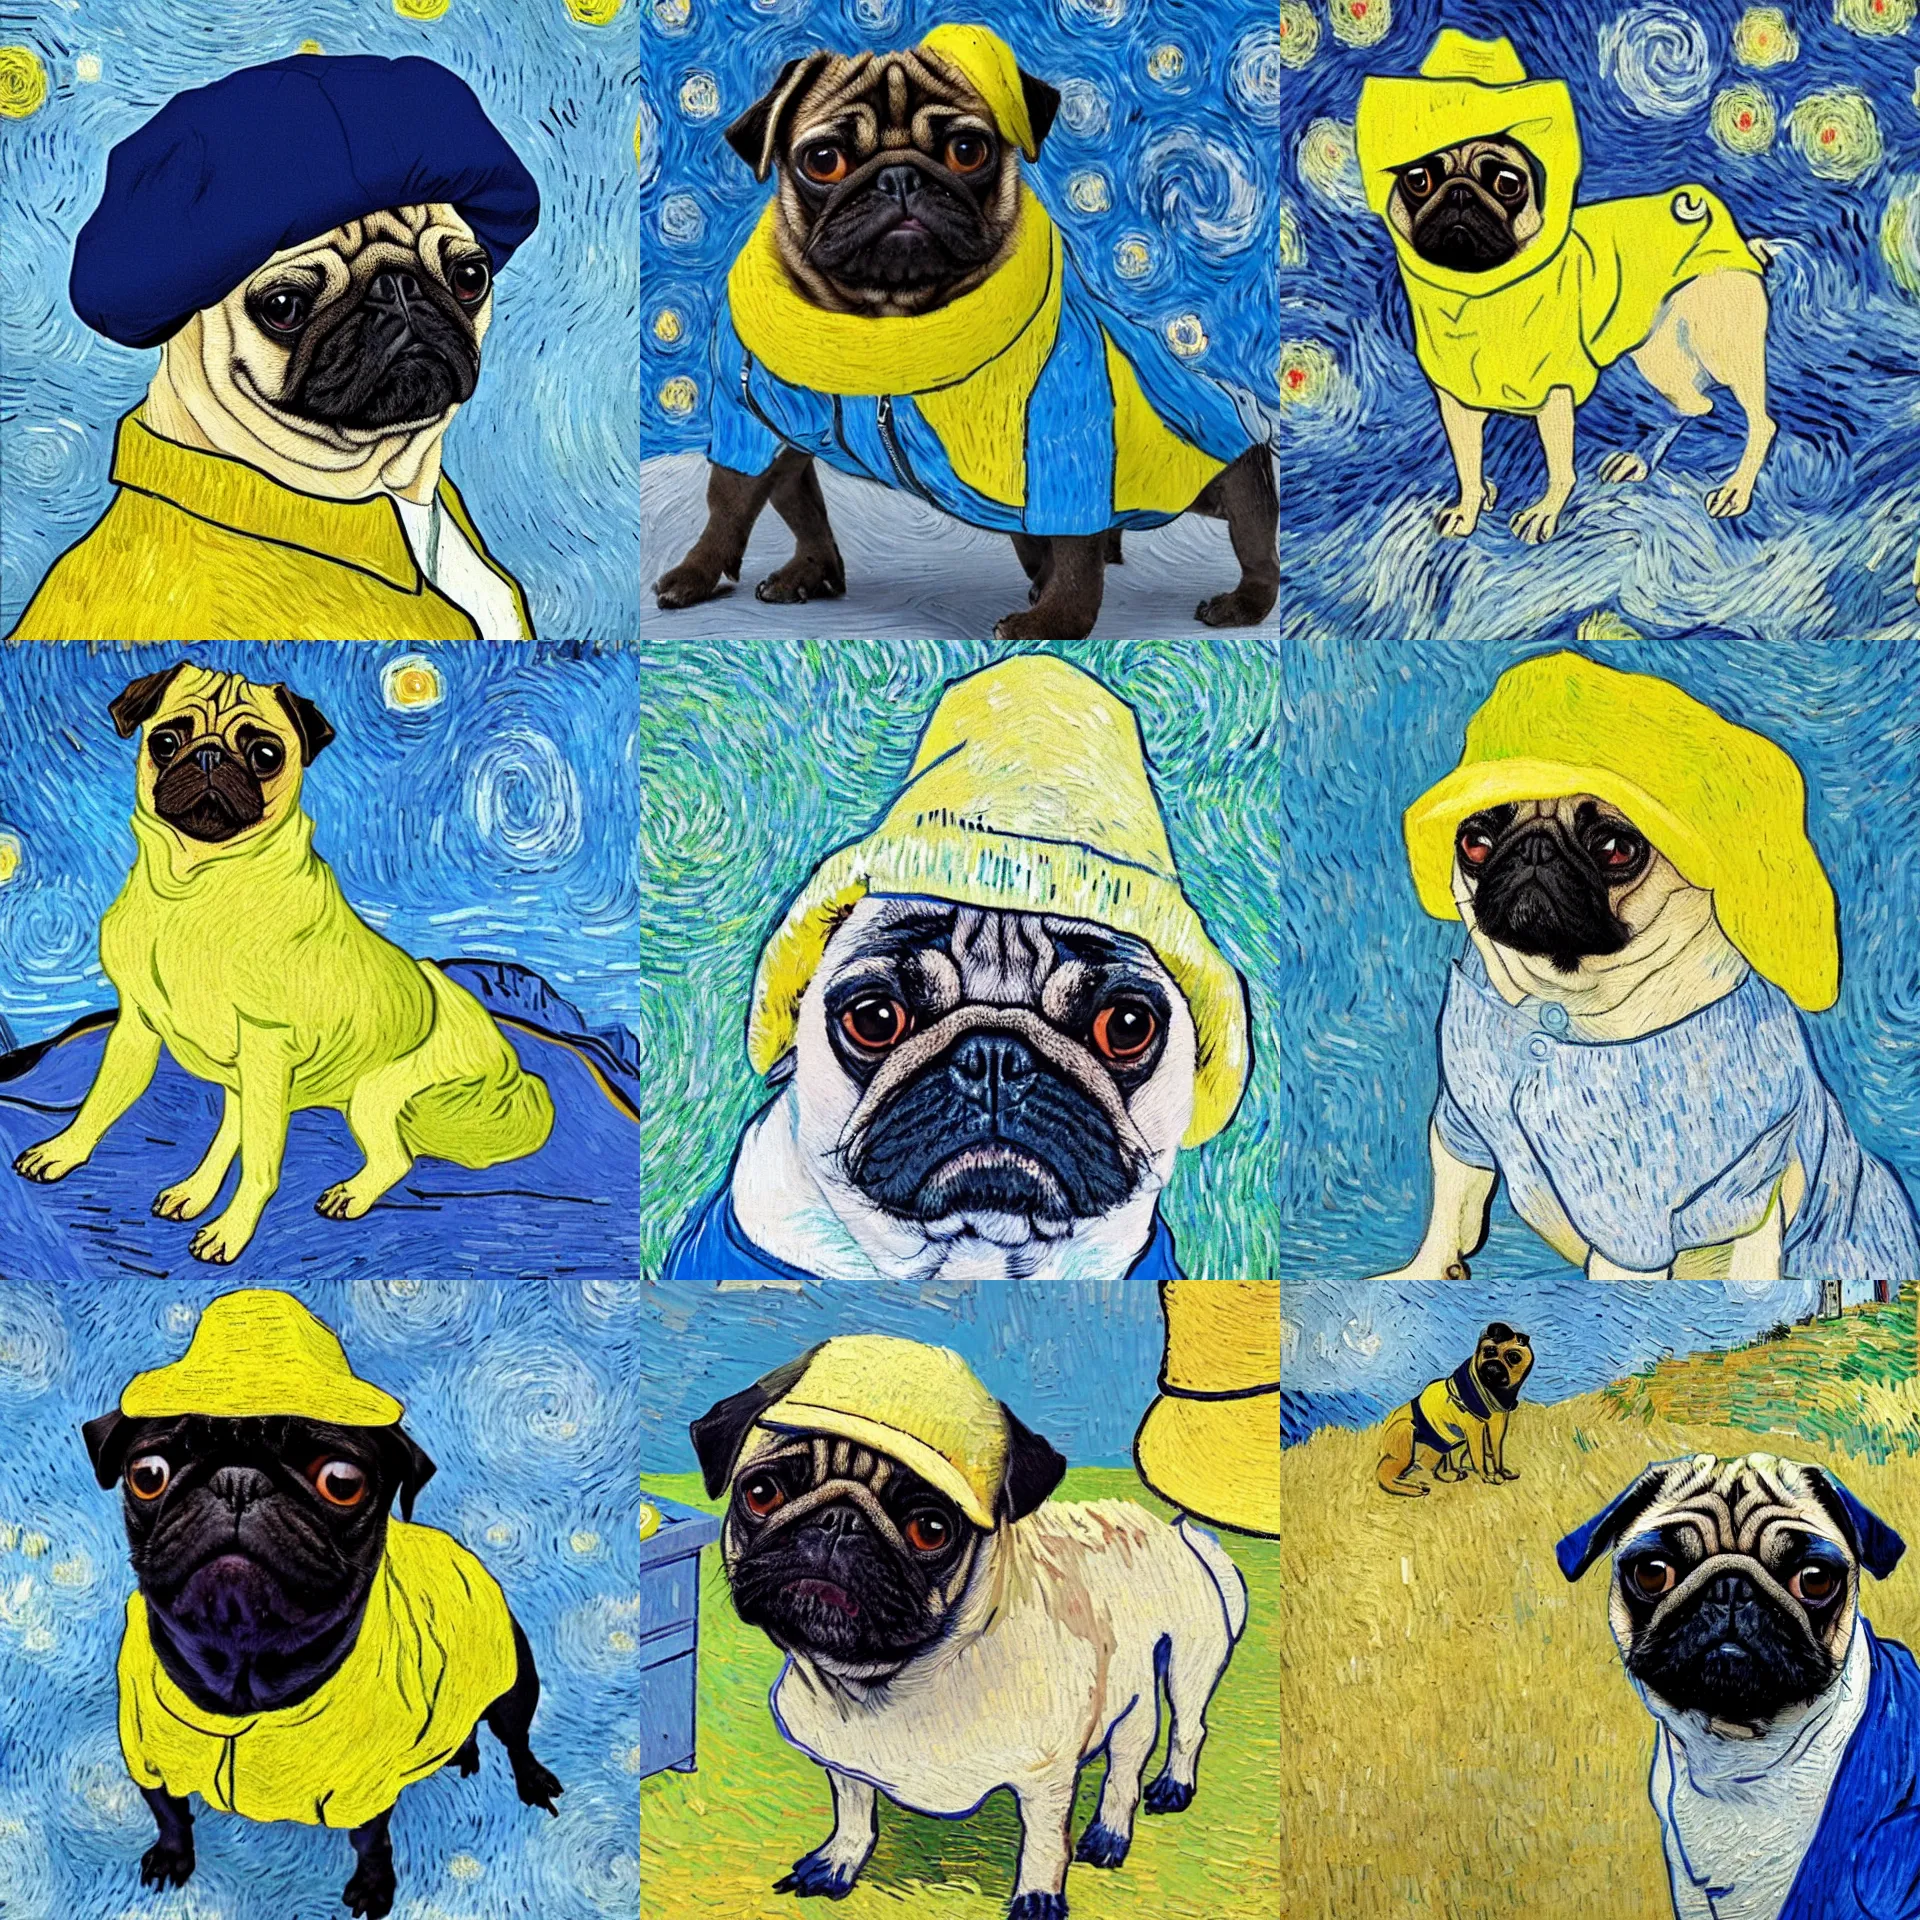 Prompt: a confused pug, wearing a blue jacket, a white shirt and a funny yellow hat as a Van Gogh painting